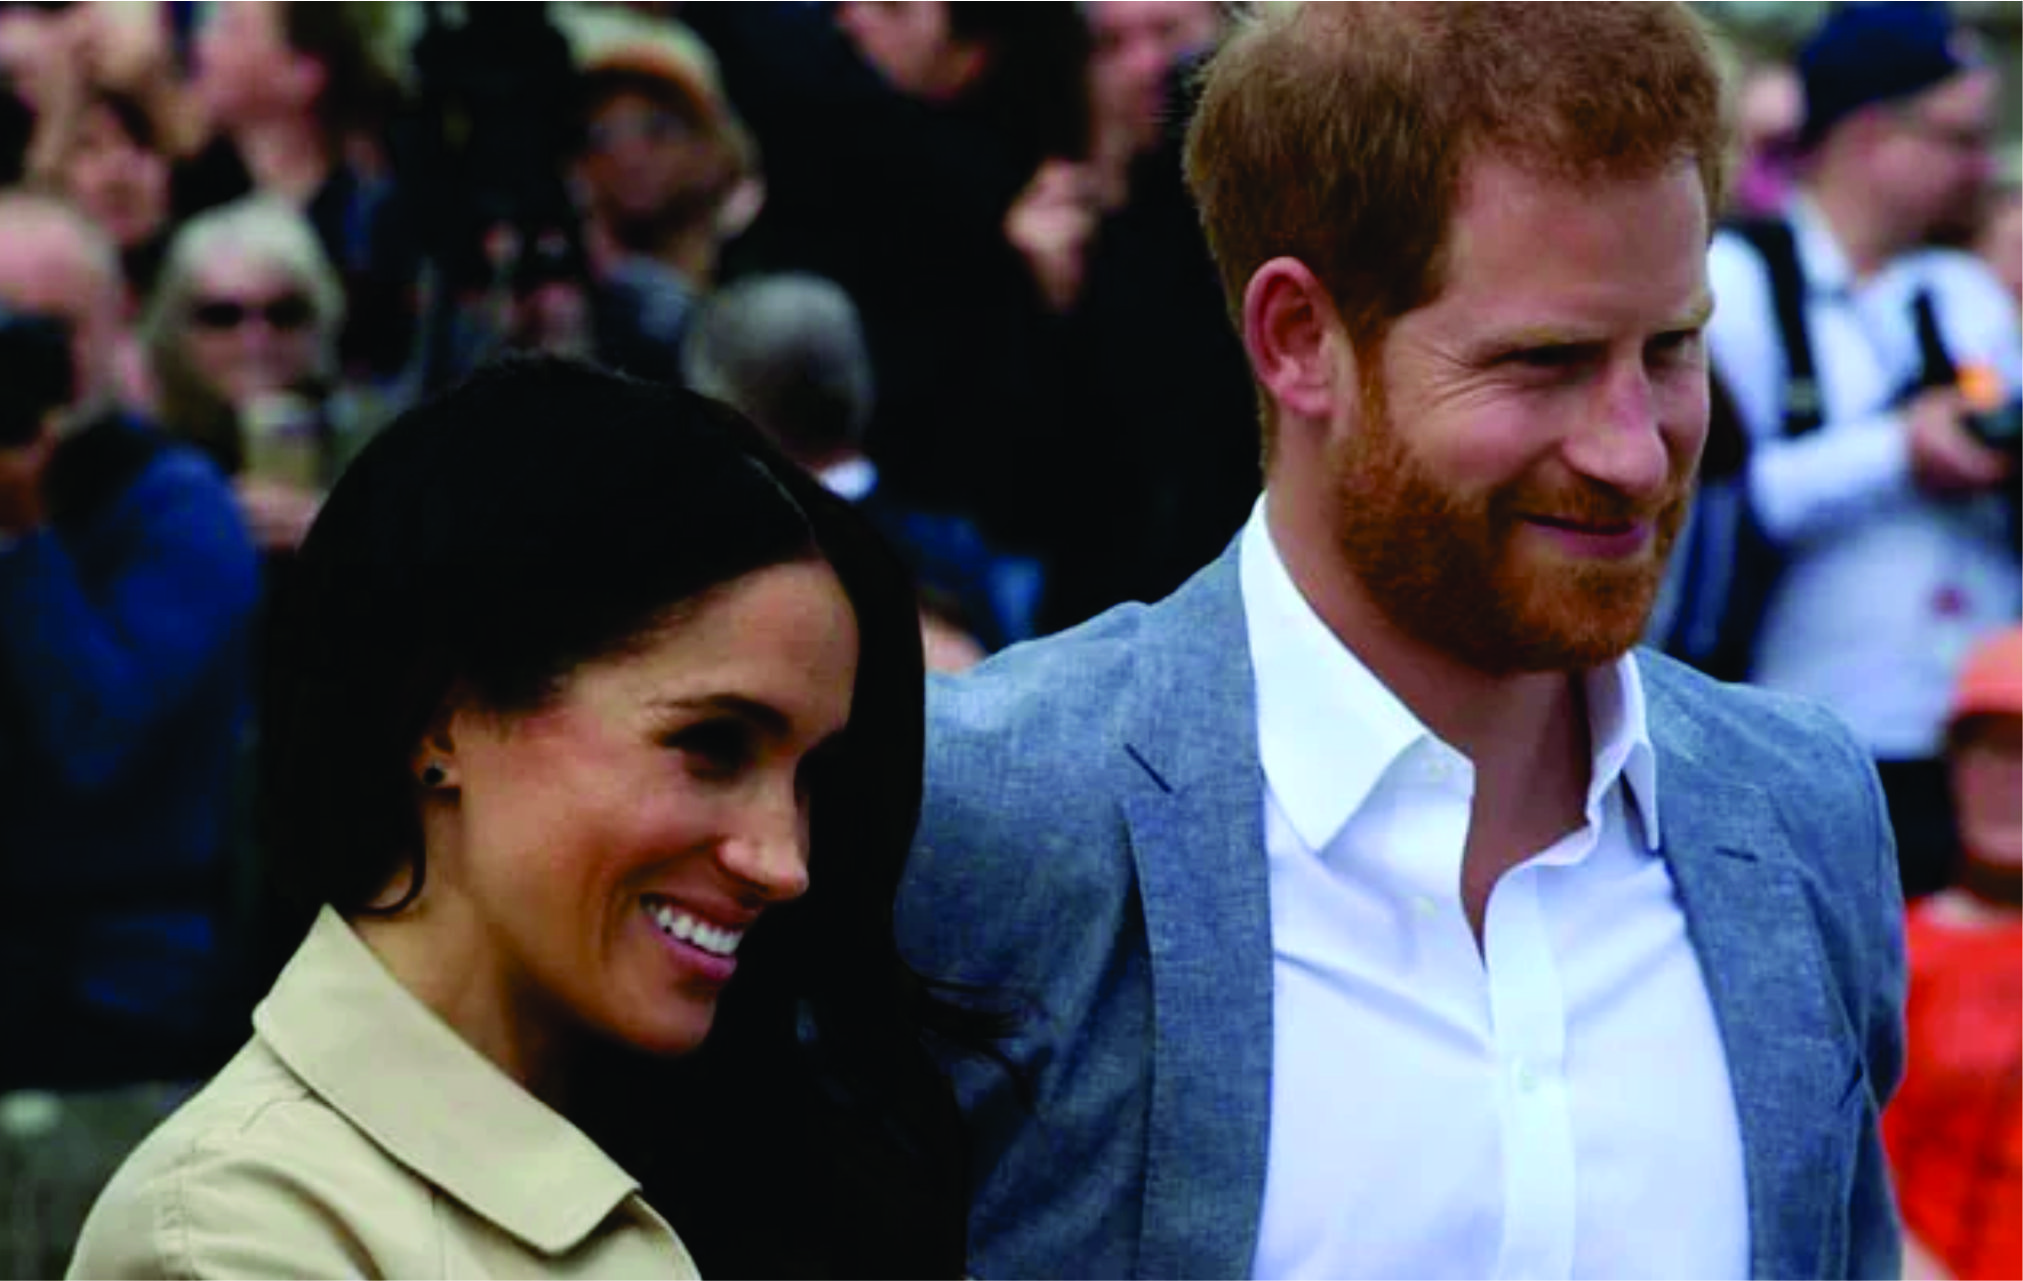 Prince Harry, Meghan Markle are in a ‘trial separation’